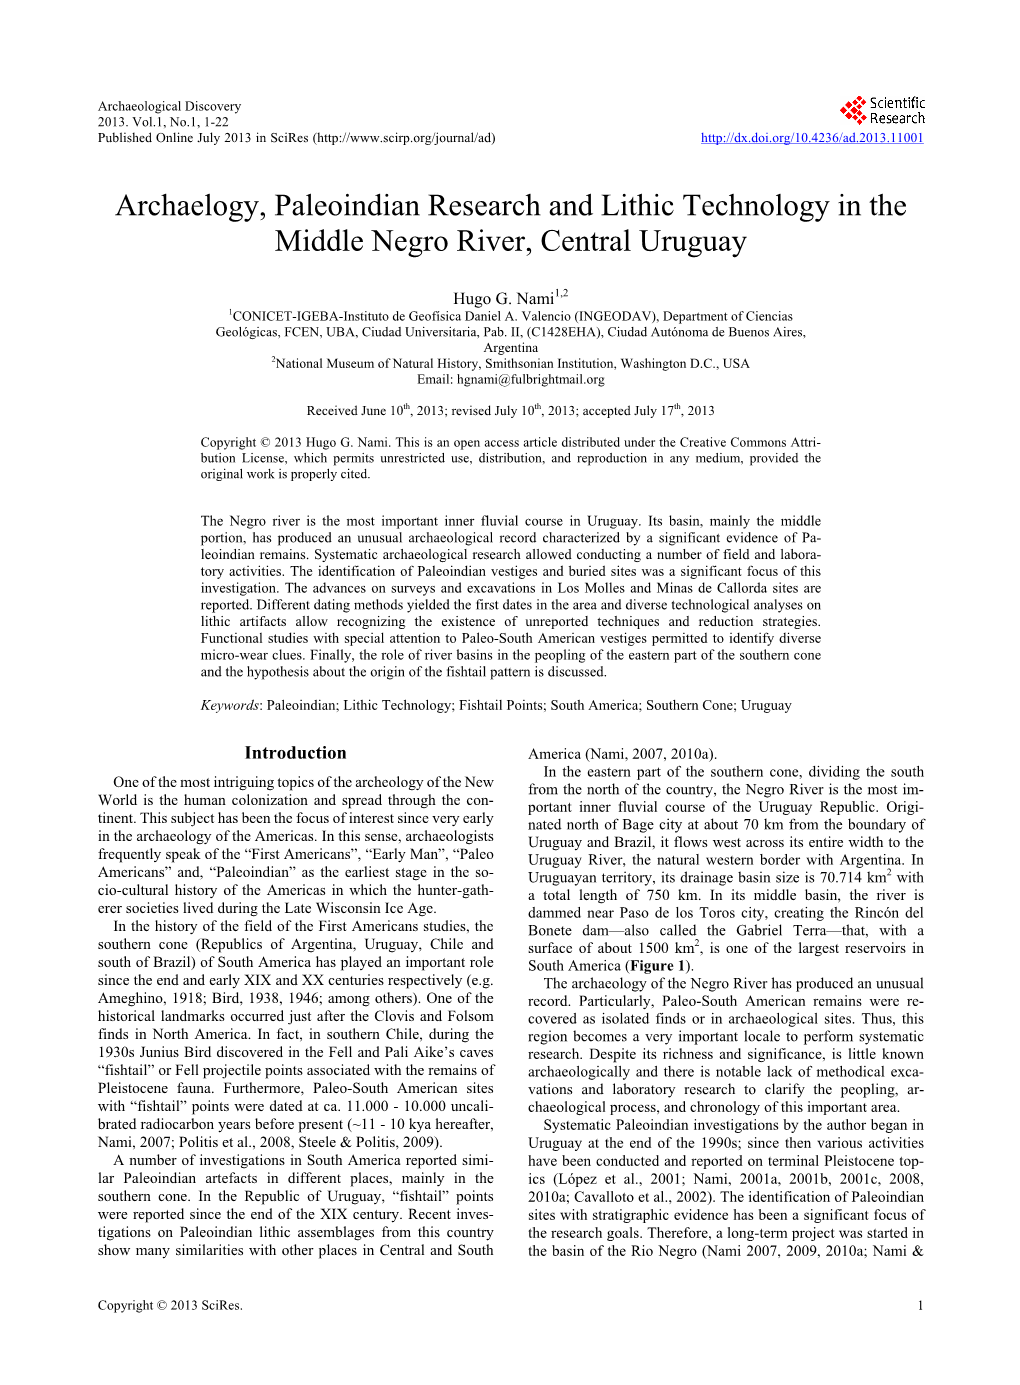 Archaelogy, Paleoindian Research and Lithic Technology in the Middle Negro River, Central Uruguay